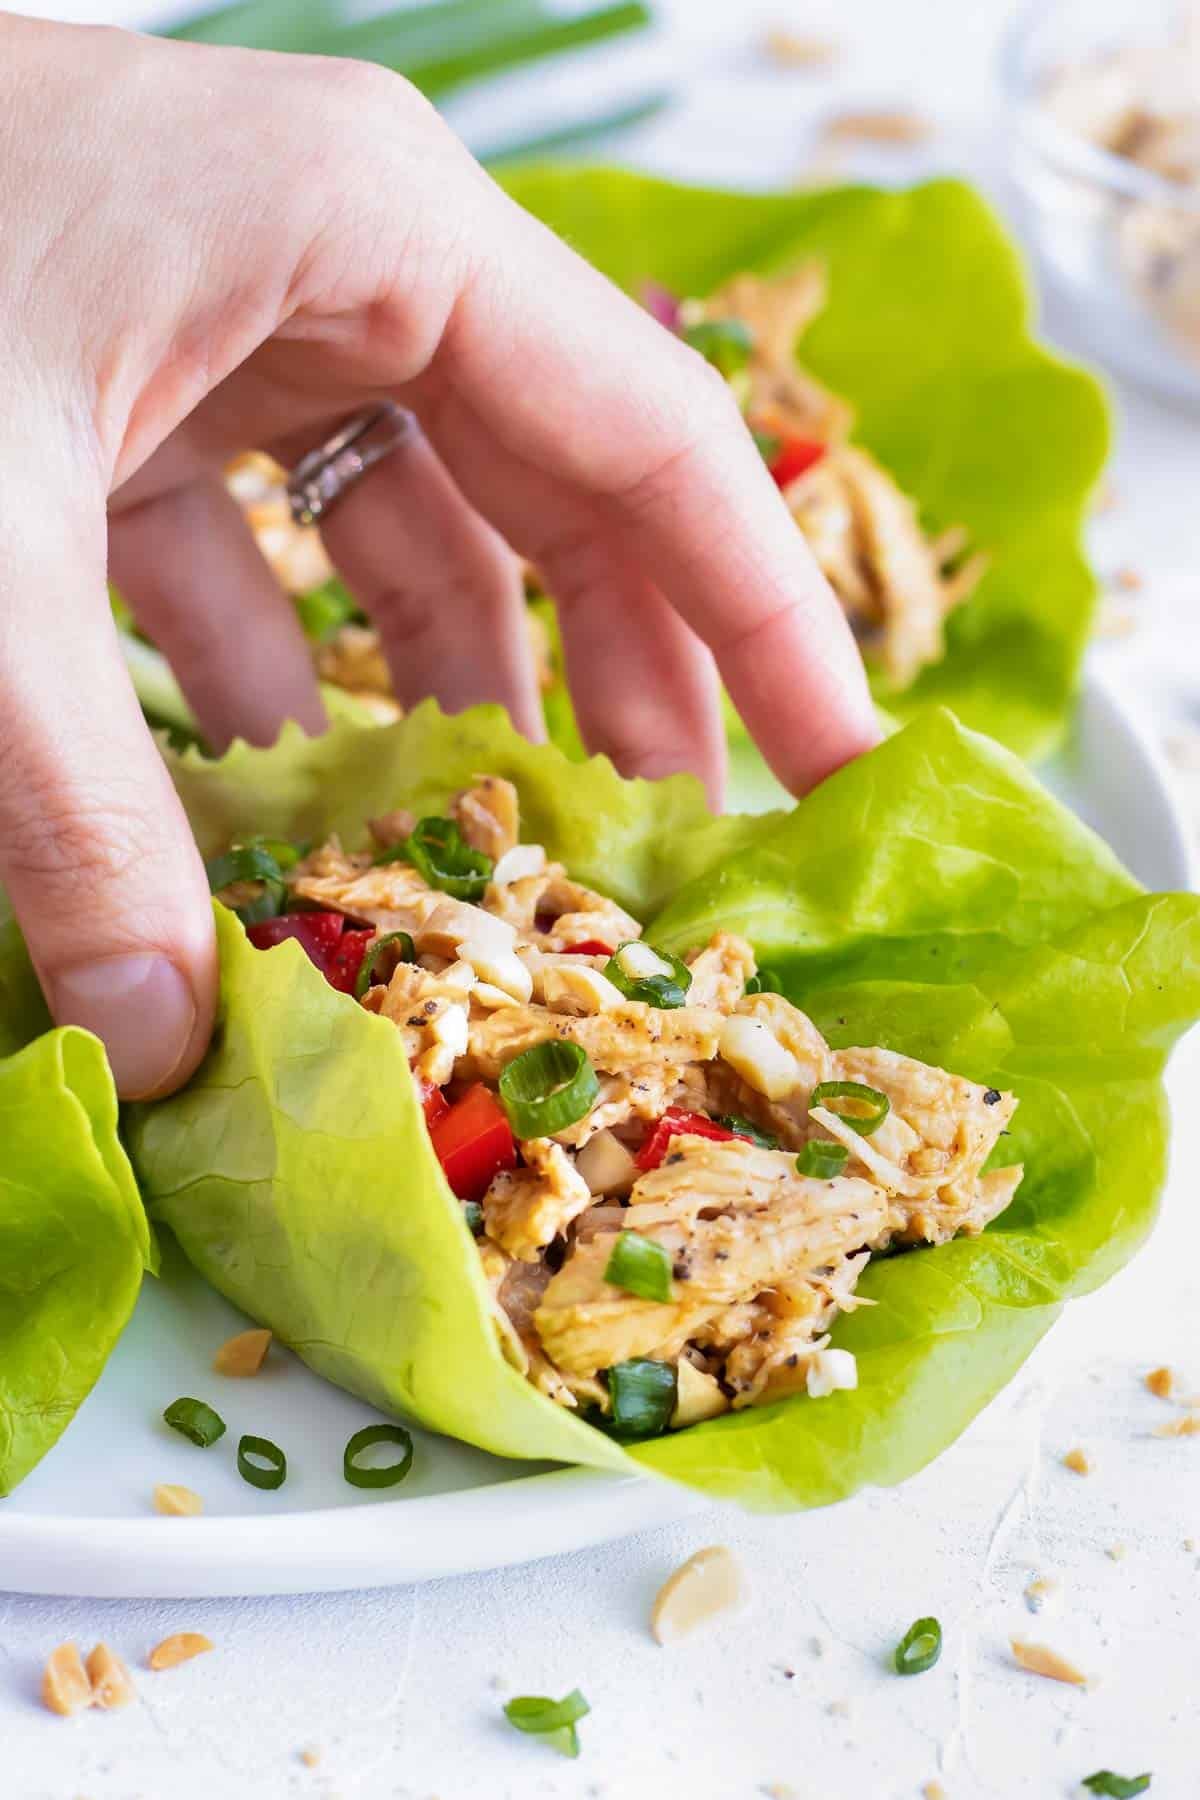 A hand picking up a healthy lettuce wrap that is full of shredded chicken and an Asian sauce.